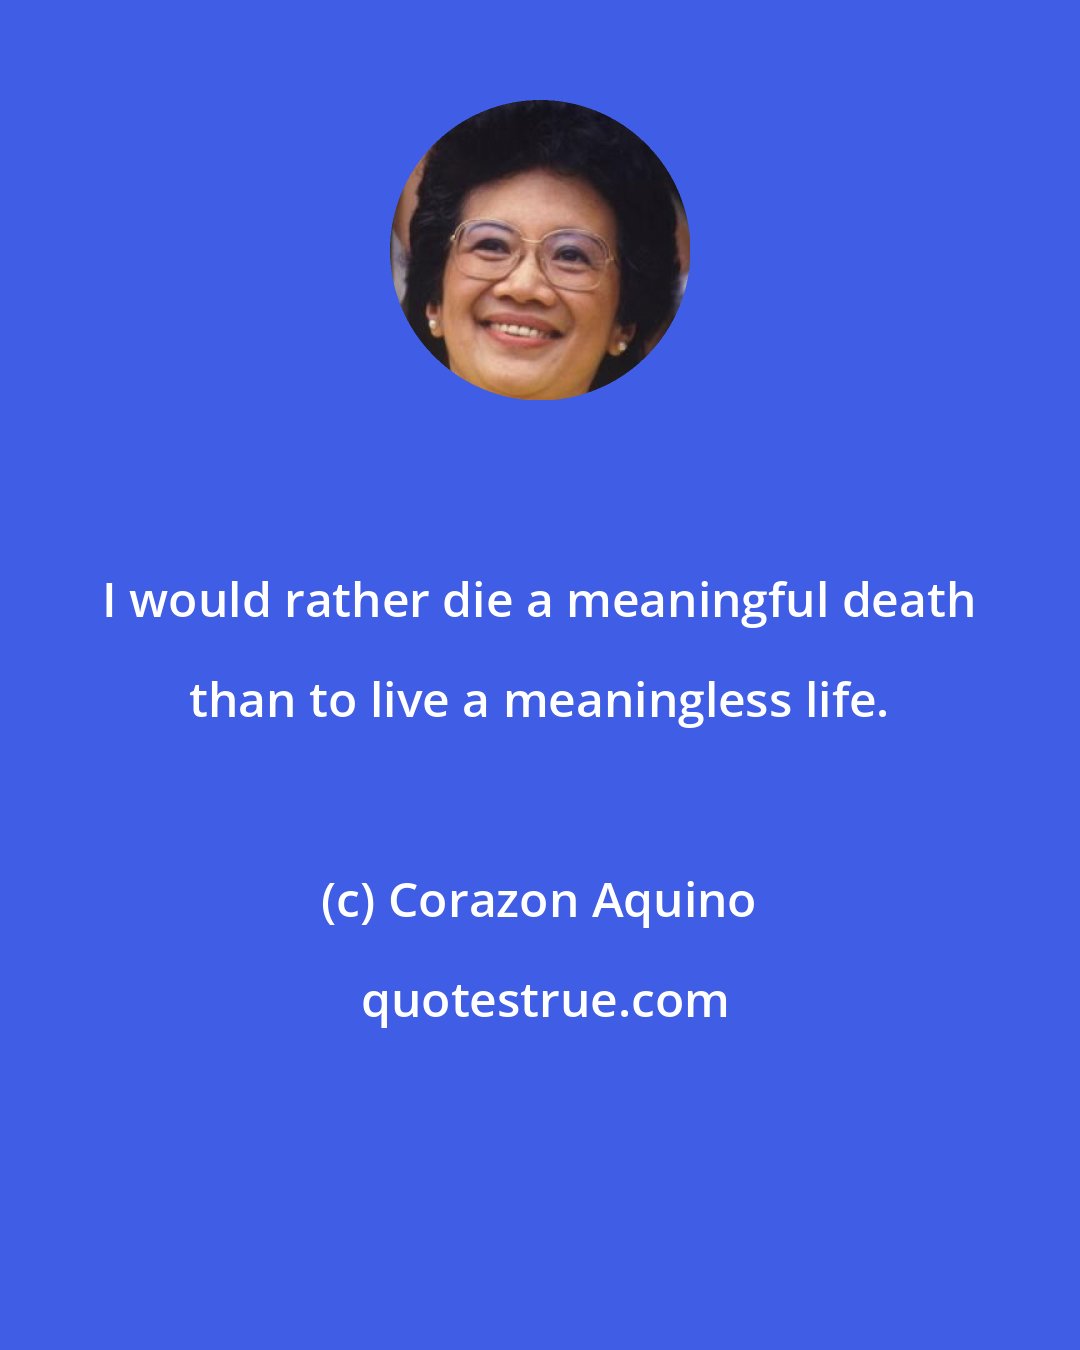 Corazon Aquino: I would rather die a meaningful death than to live a meaningless life.